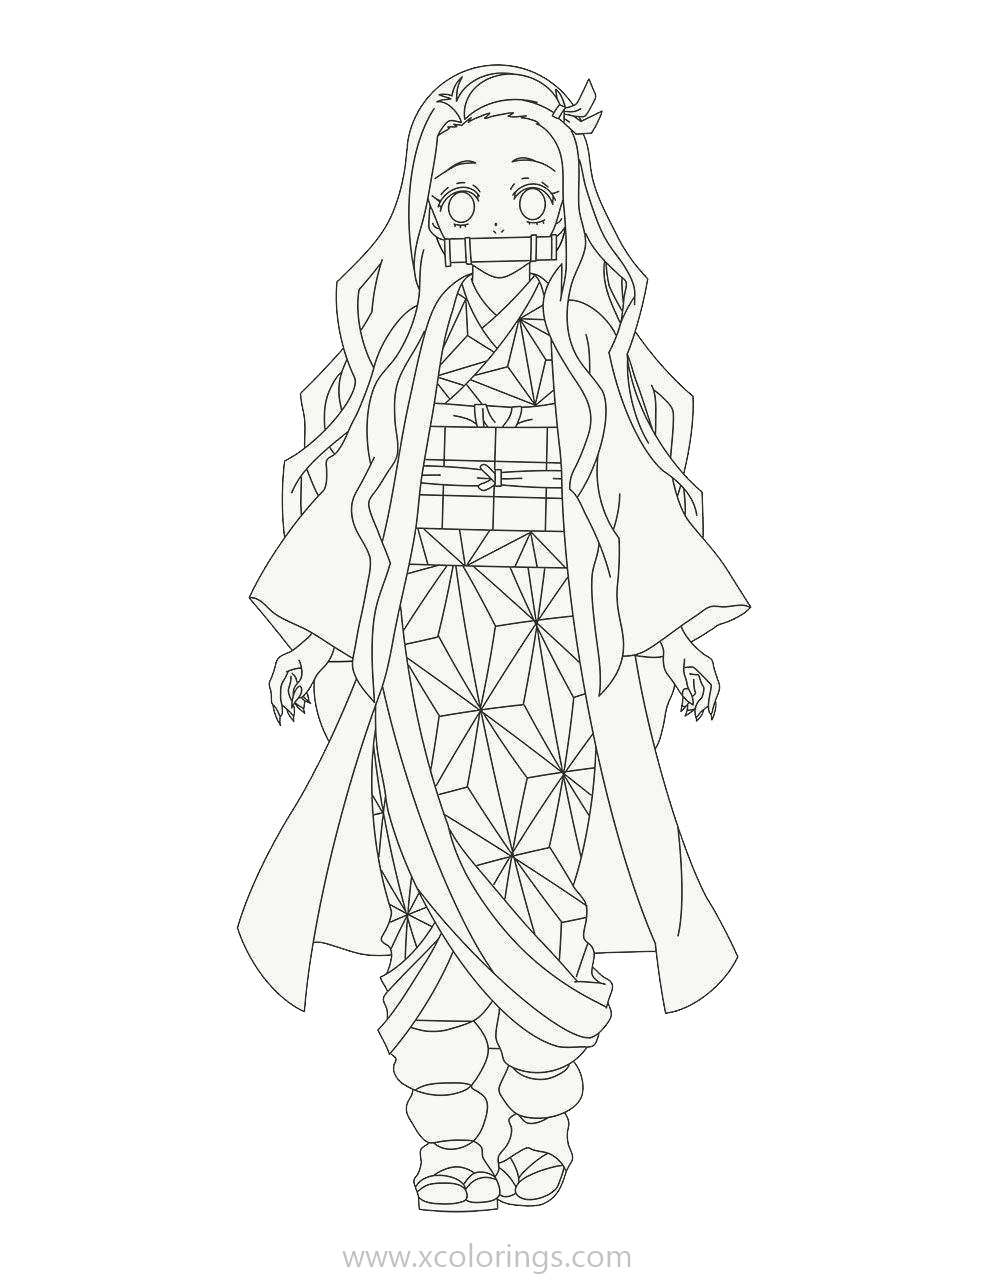 Demon Slayer Coloring Pages Nezuko with Japanese Traditional Clothes